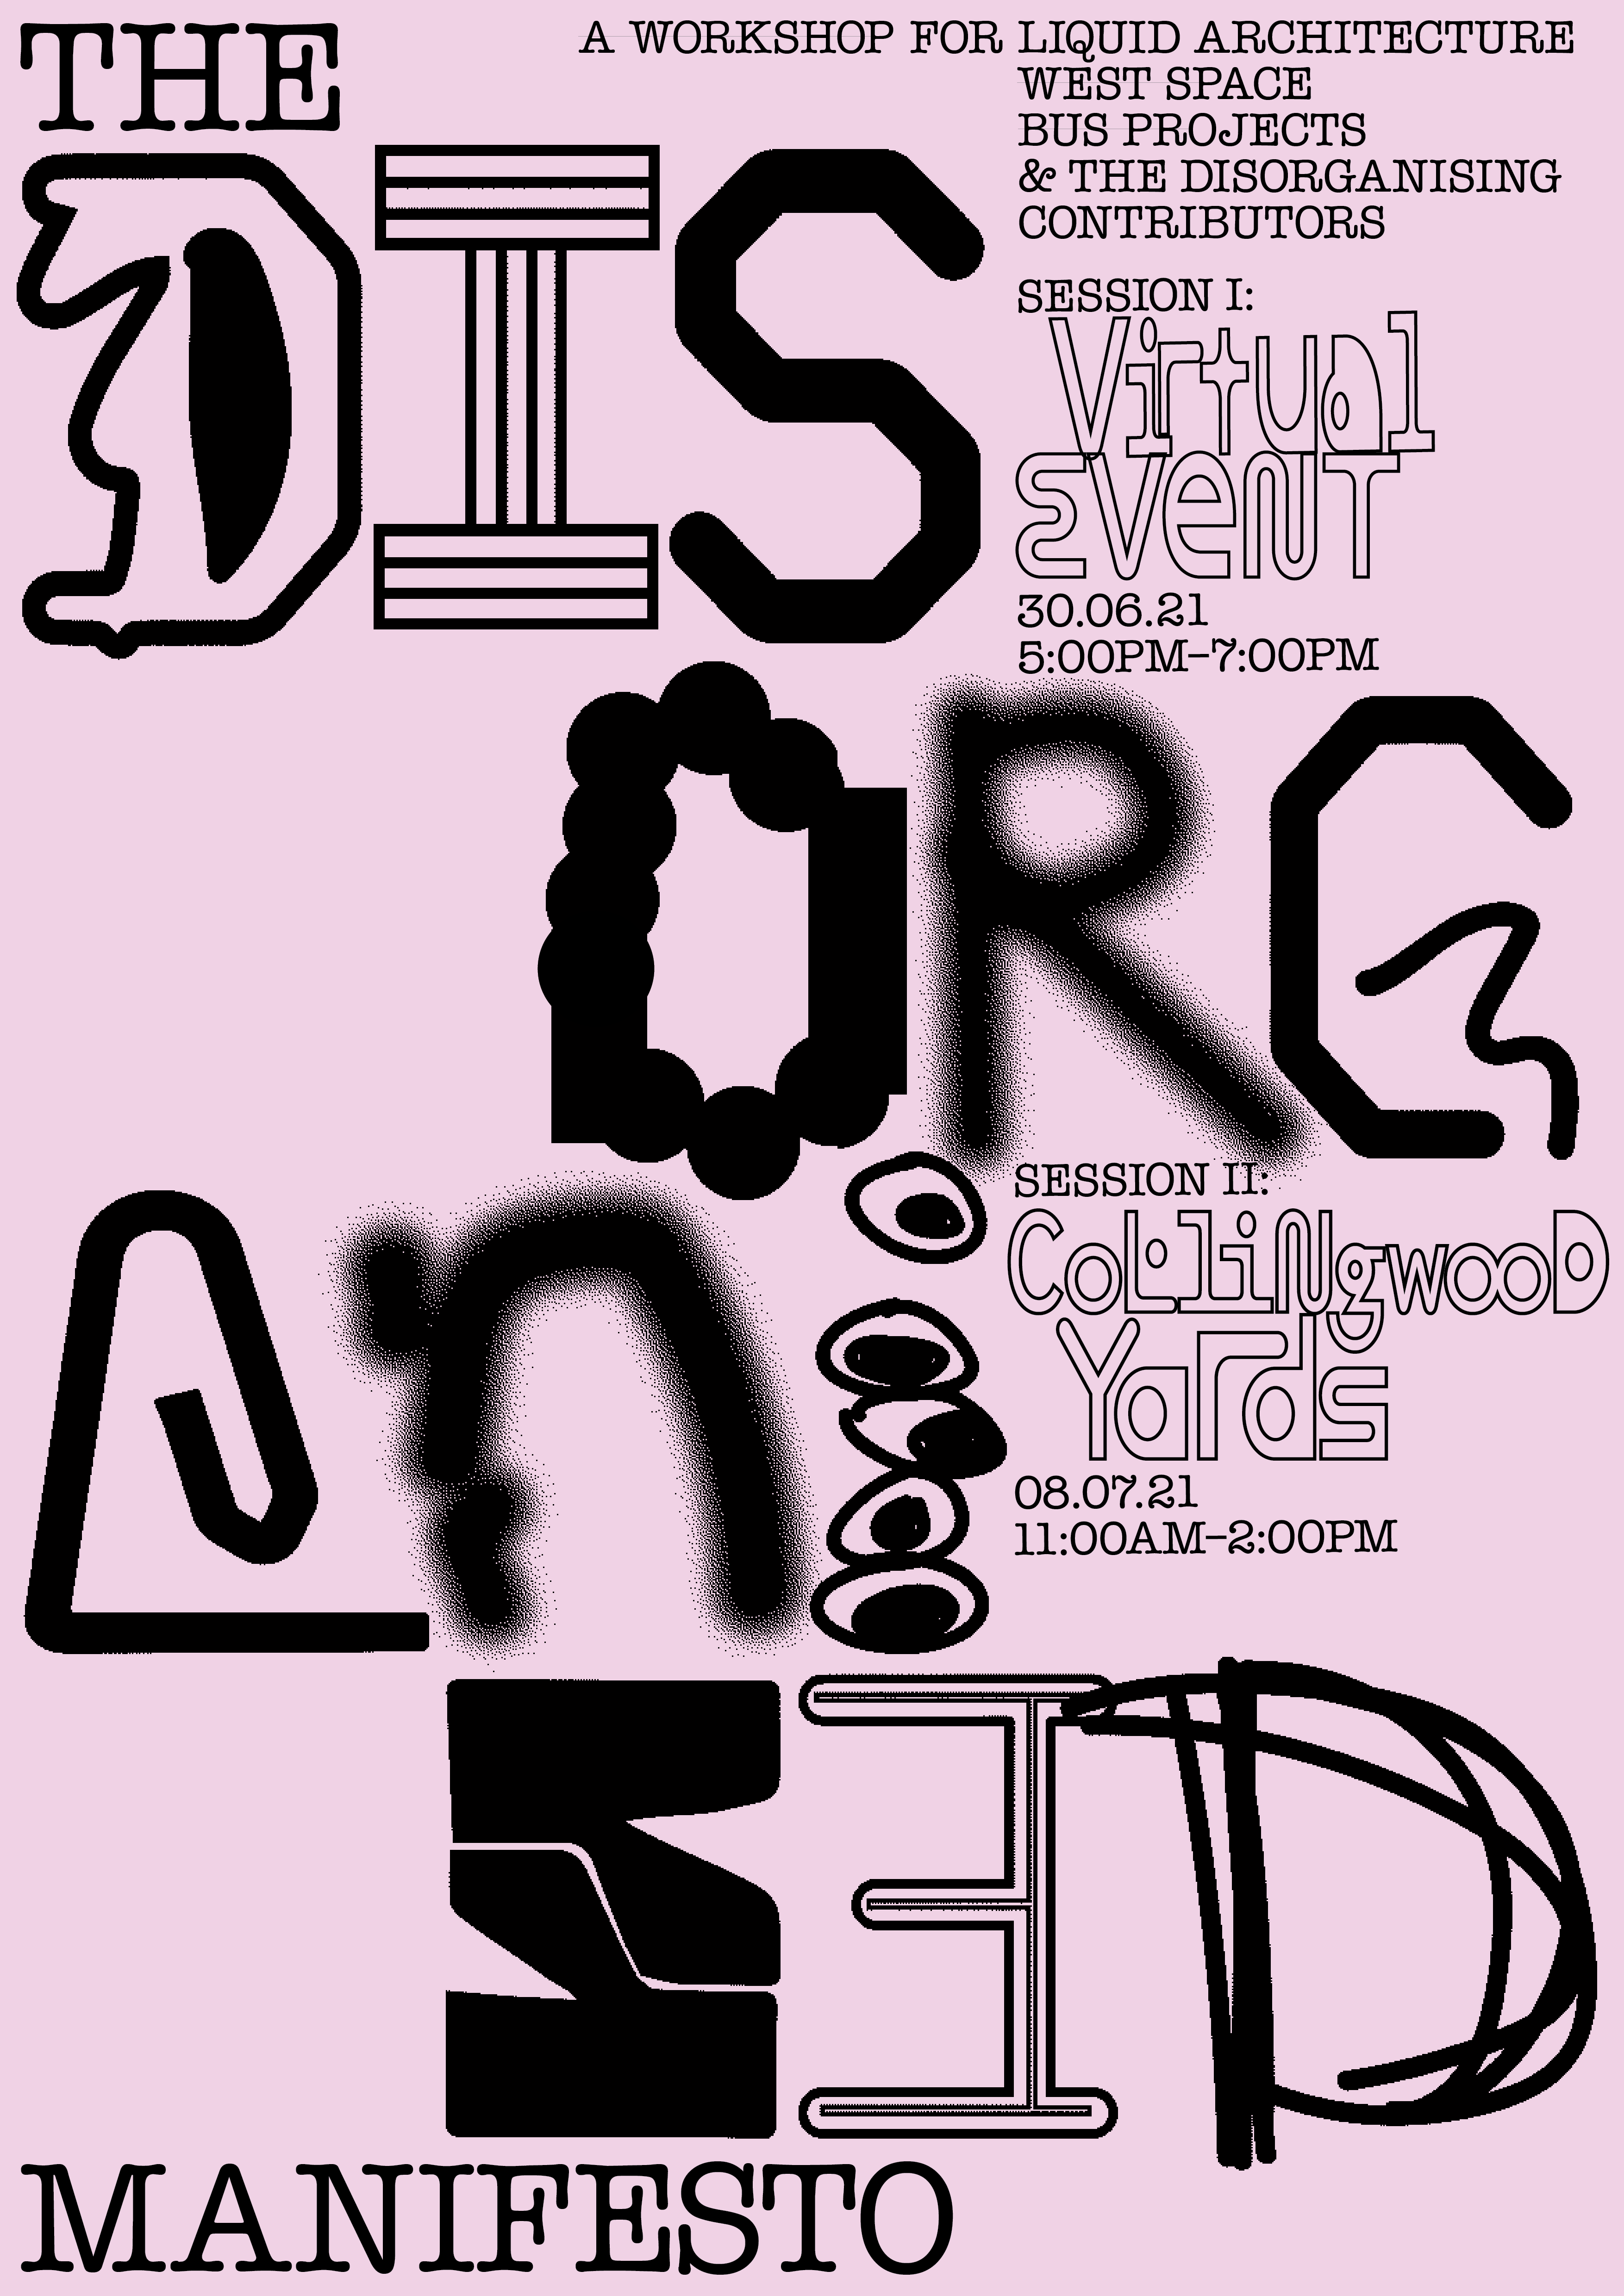 image of a pink digital flyer with the title of the workshop 'the disorganised manifesto workshop'